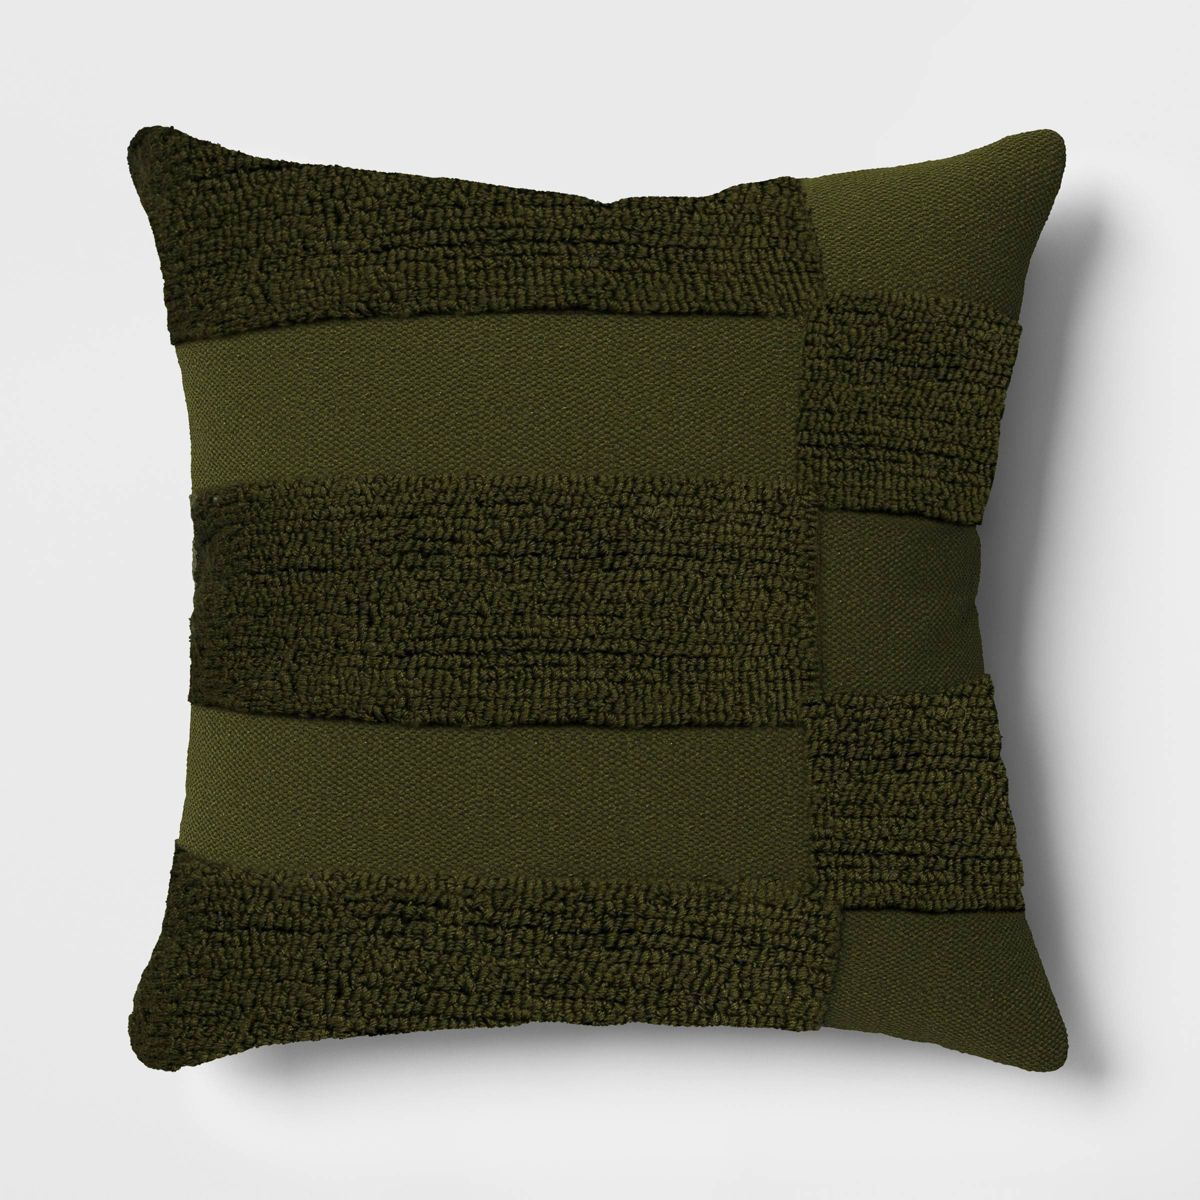 20"x20" Hook Tufted Square Outdoor Throw Pillow Dark Green - Threshold™ | Target